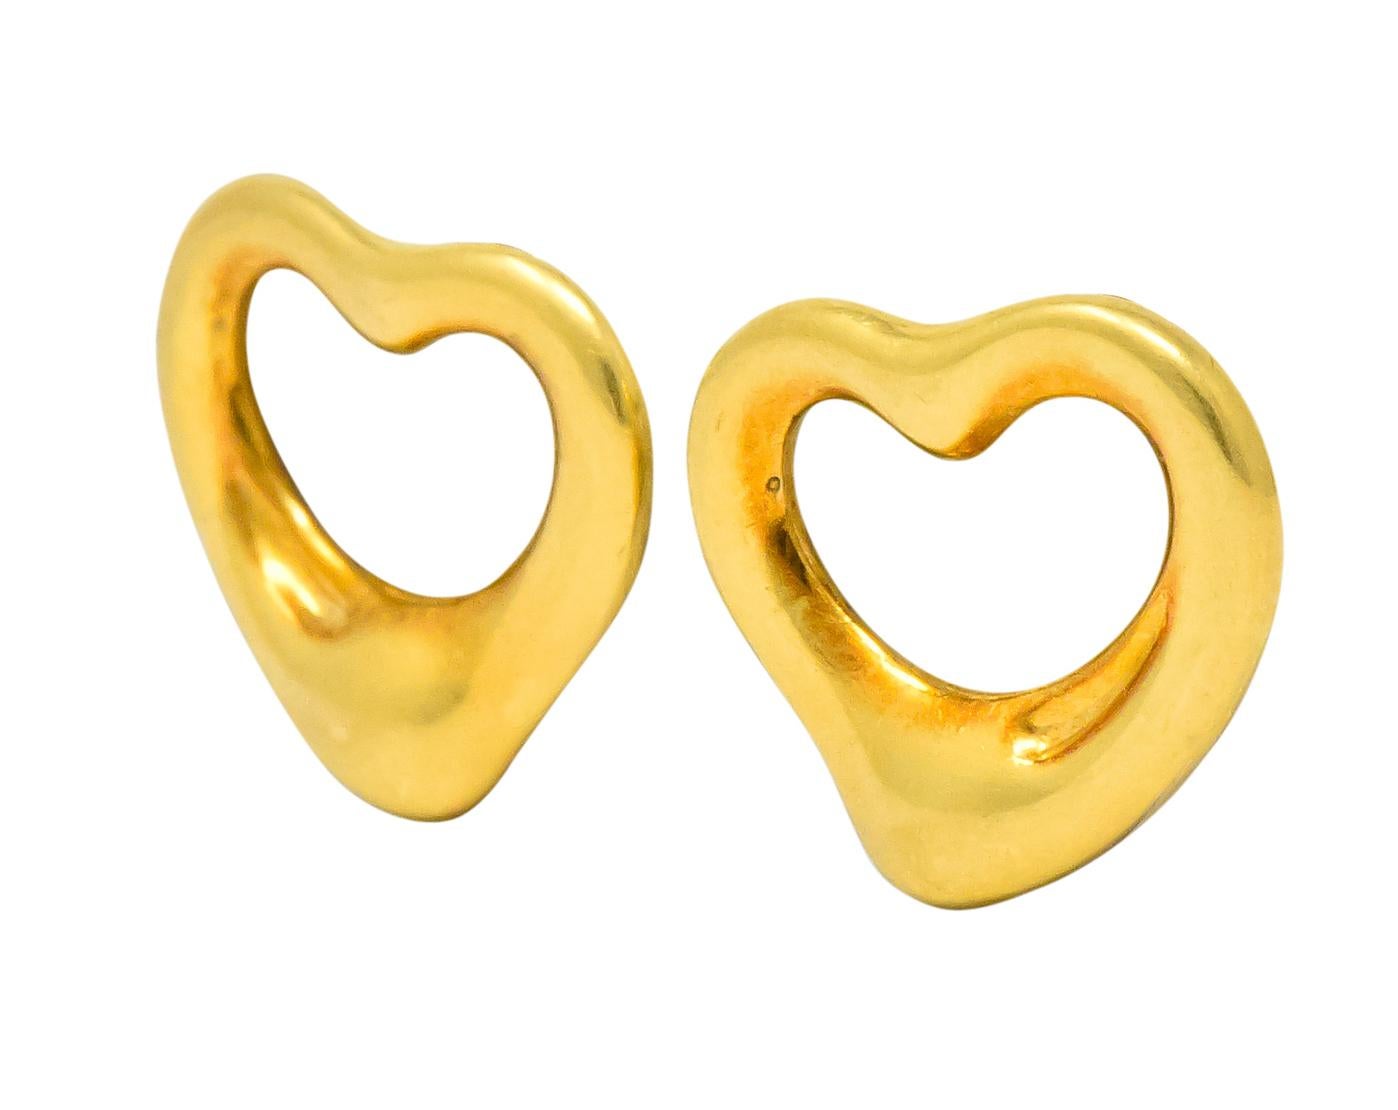 Featuring Elsa Peretti's open heart design in highly polished 18 karat gold

Outline of heart in graduating width and thickness

Fully signed Tiffany & Co. 750 (for 18 karat) Spain and Elsa Peretti makers mark

Post and friction backs

Measures: